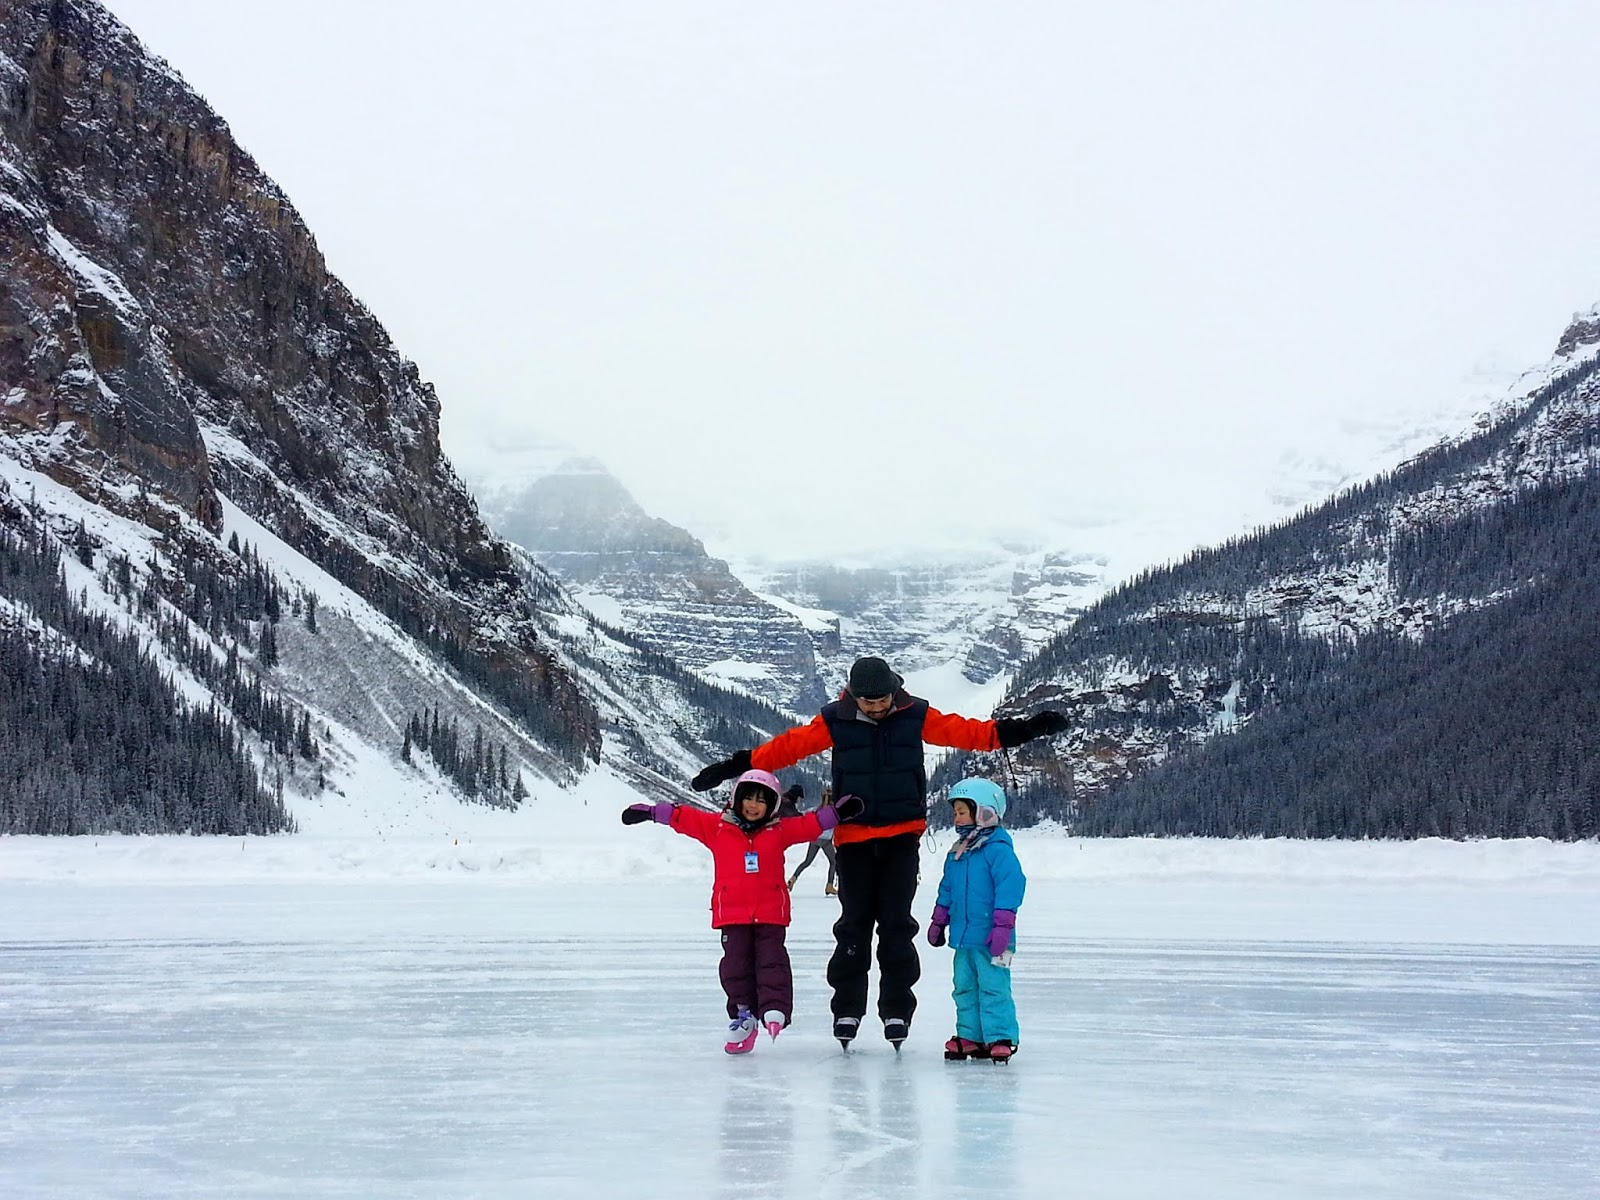 Happy Holidays from Lake Louise